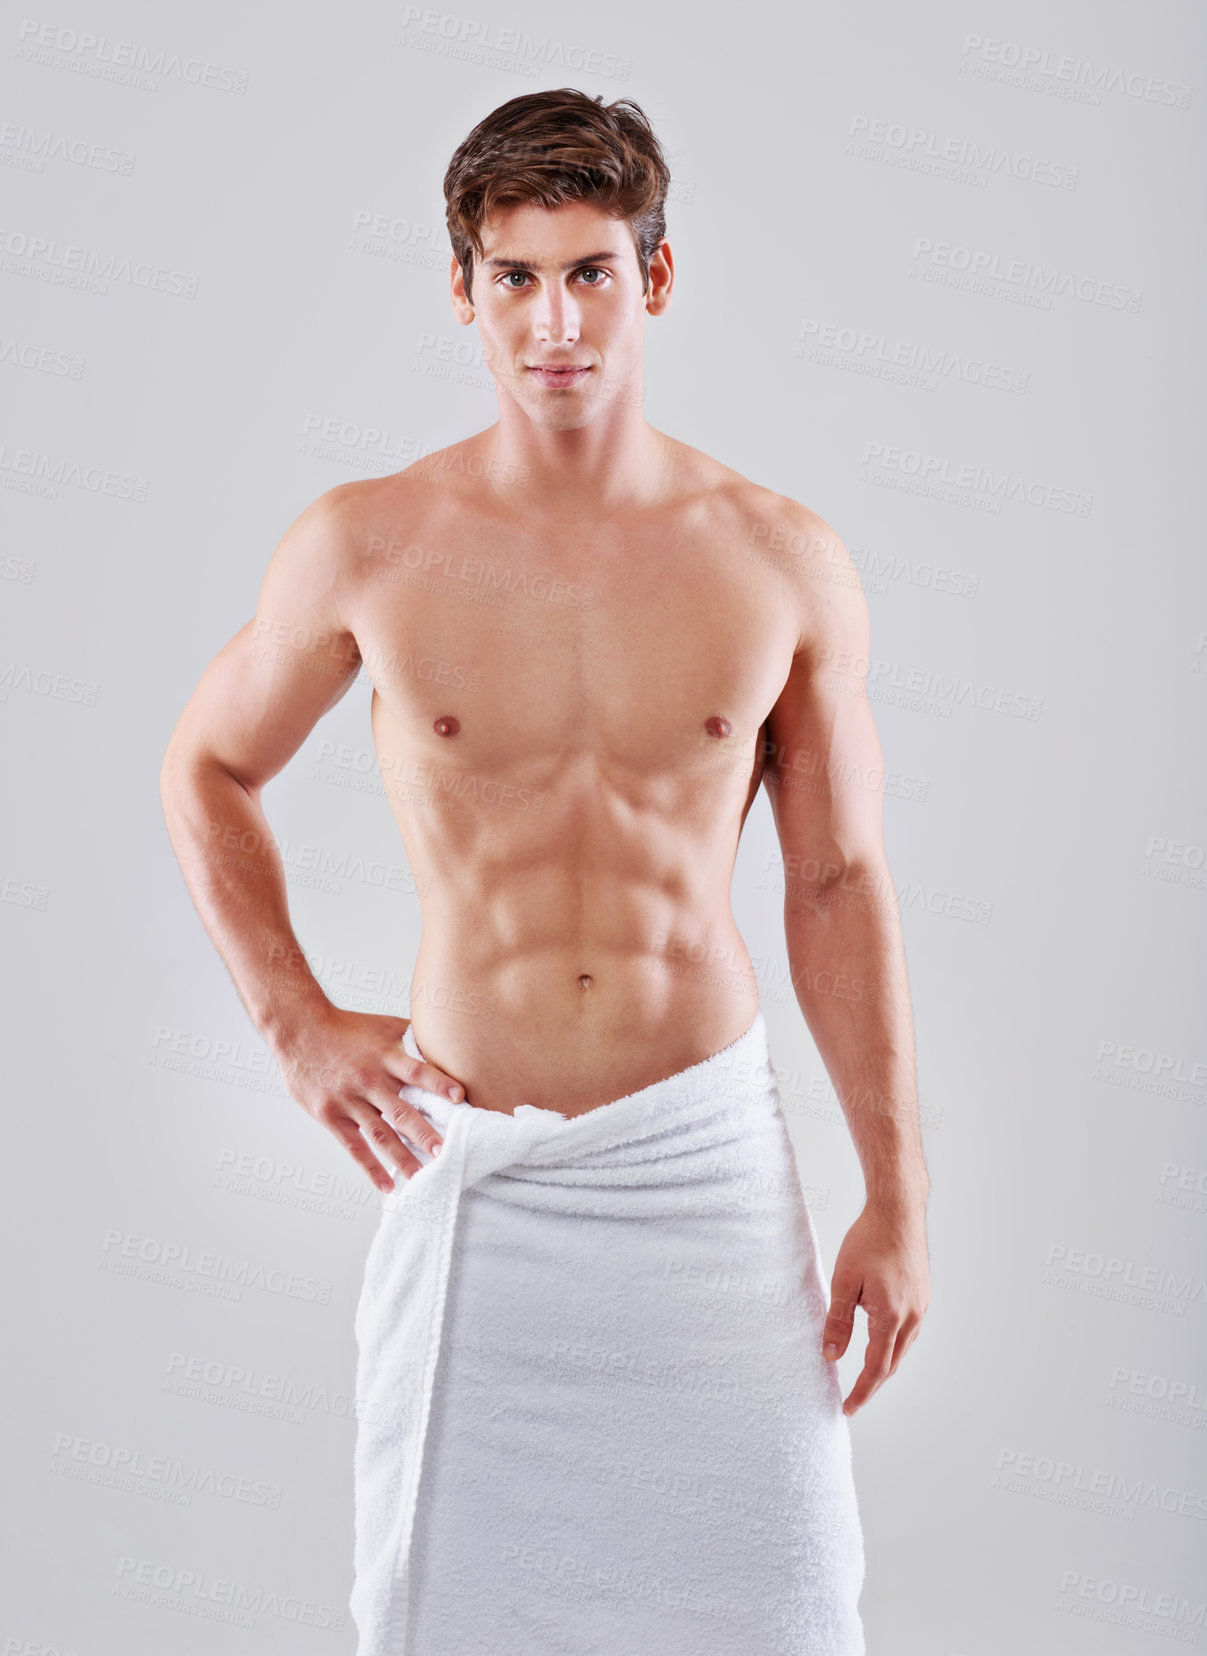 Buy stock photo Towel, shower and portrait of man on a white background for wellness, hygiene and cleaning for health. Skincare, bathroom and isolated person with muscle for grooming, self care and washing in studio